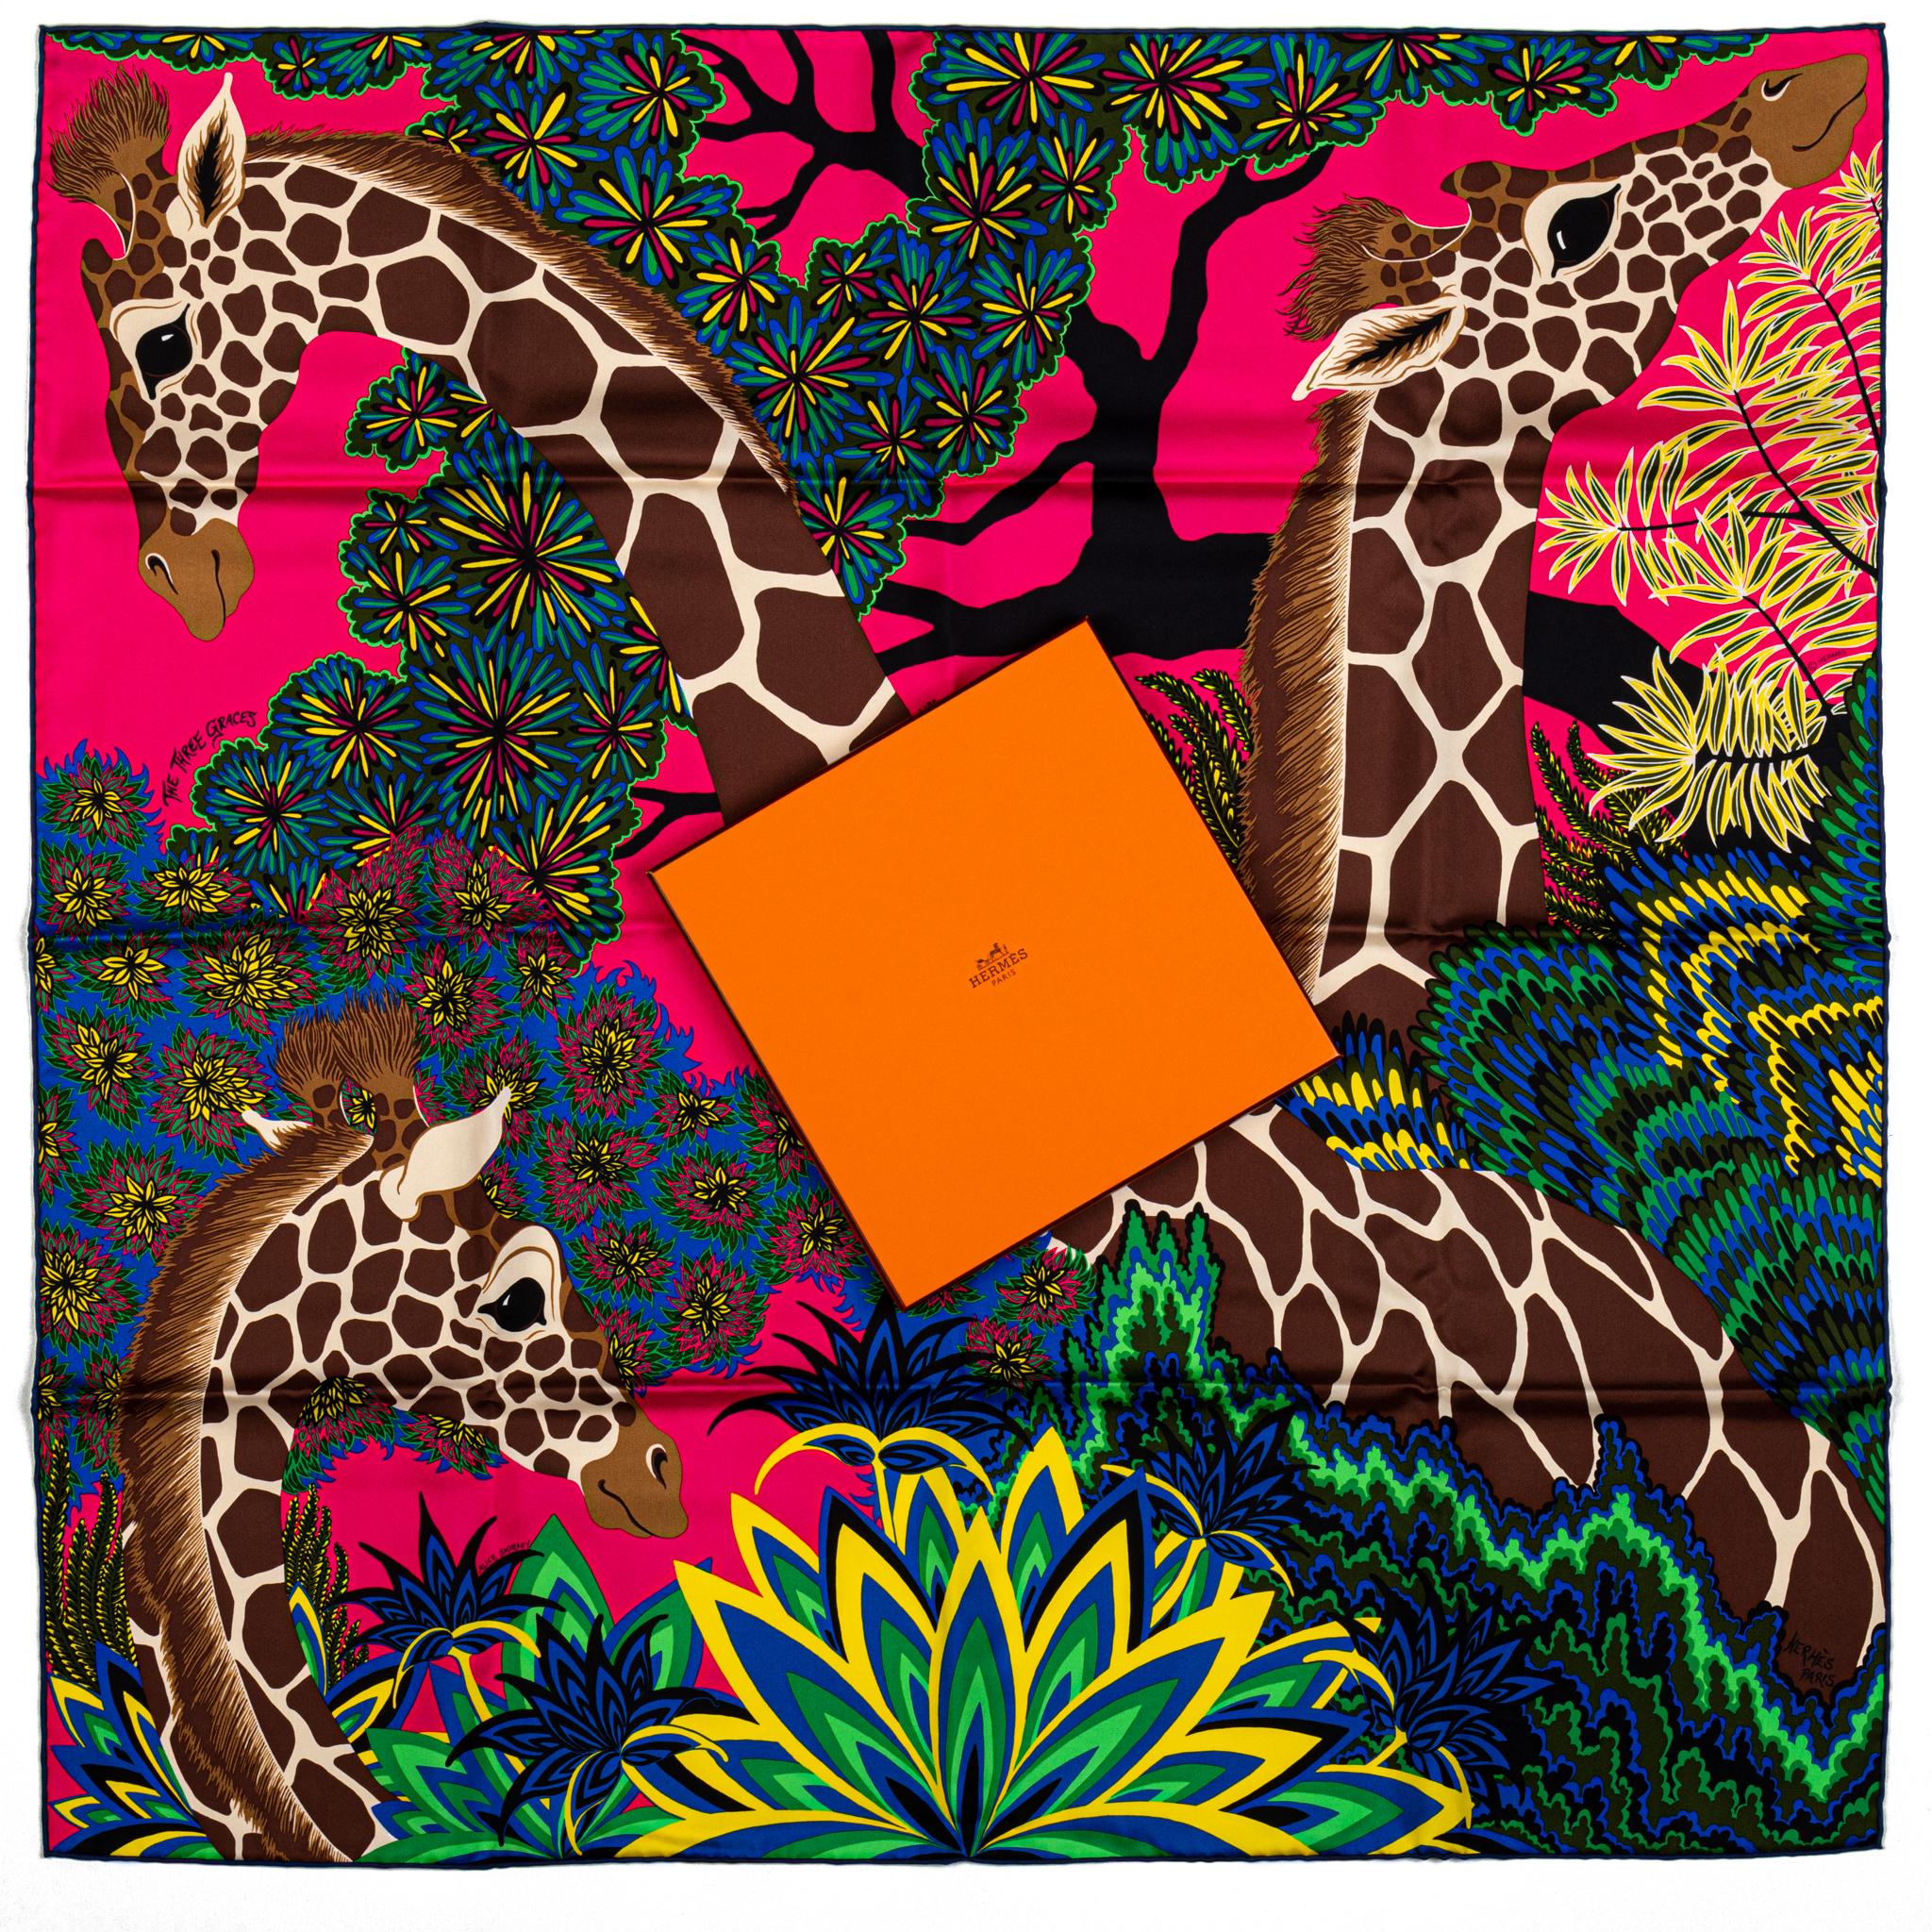 Hermès hot pink and green giraffe silk scarf. Hand-rolled edges. New in box.